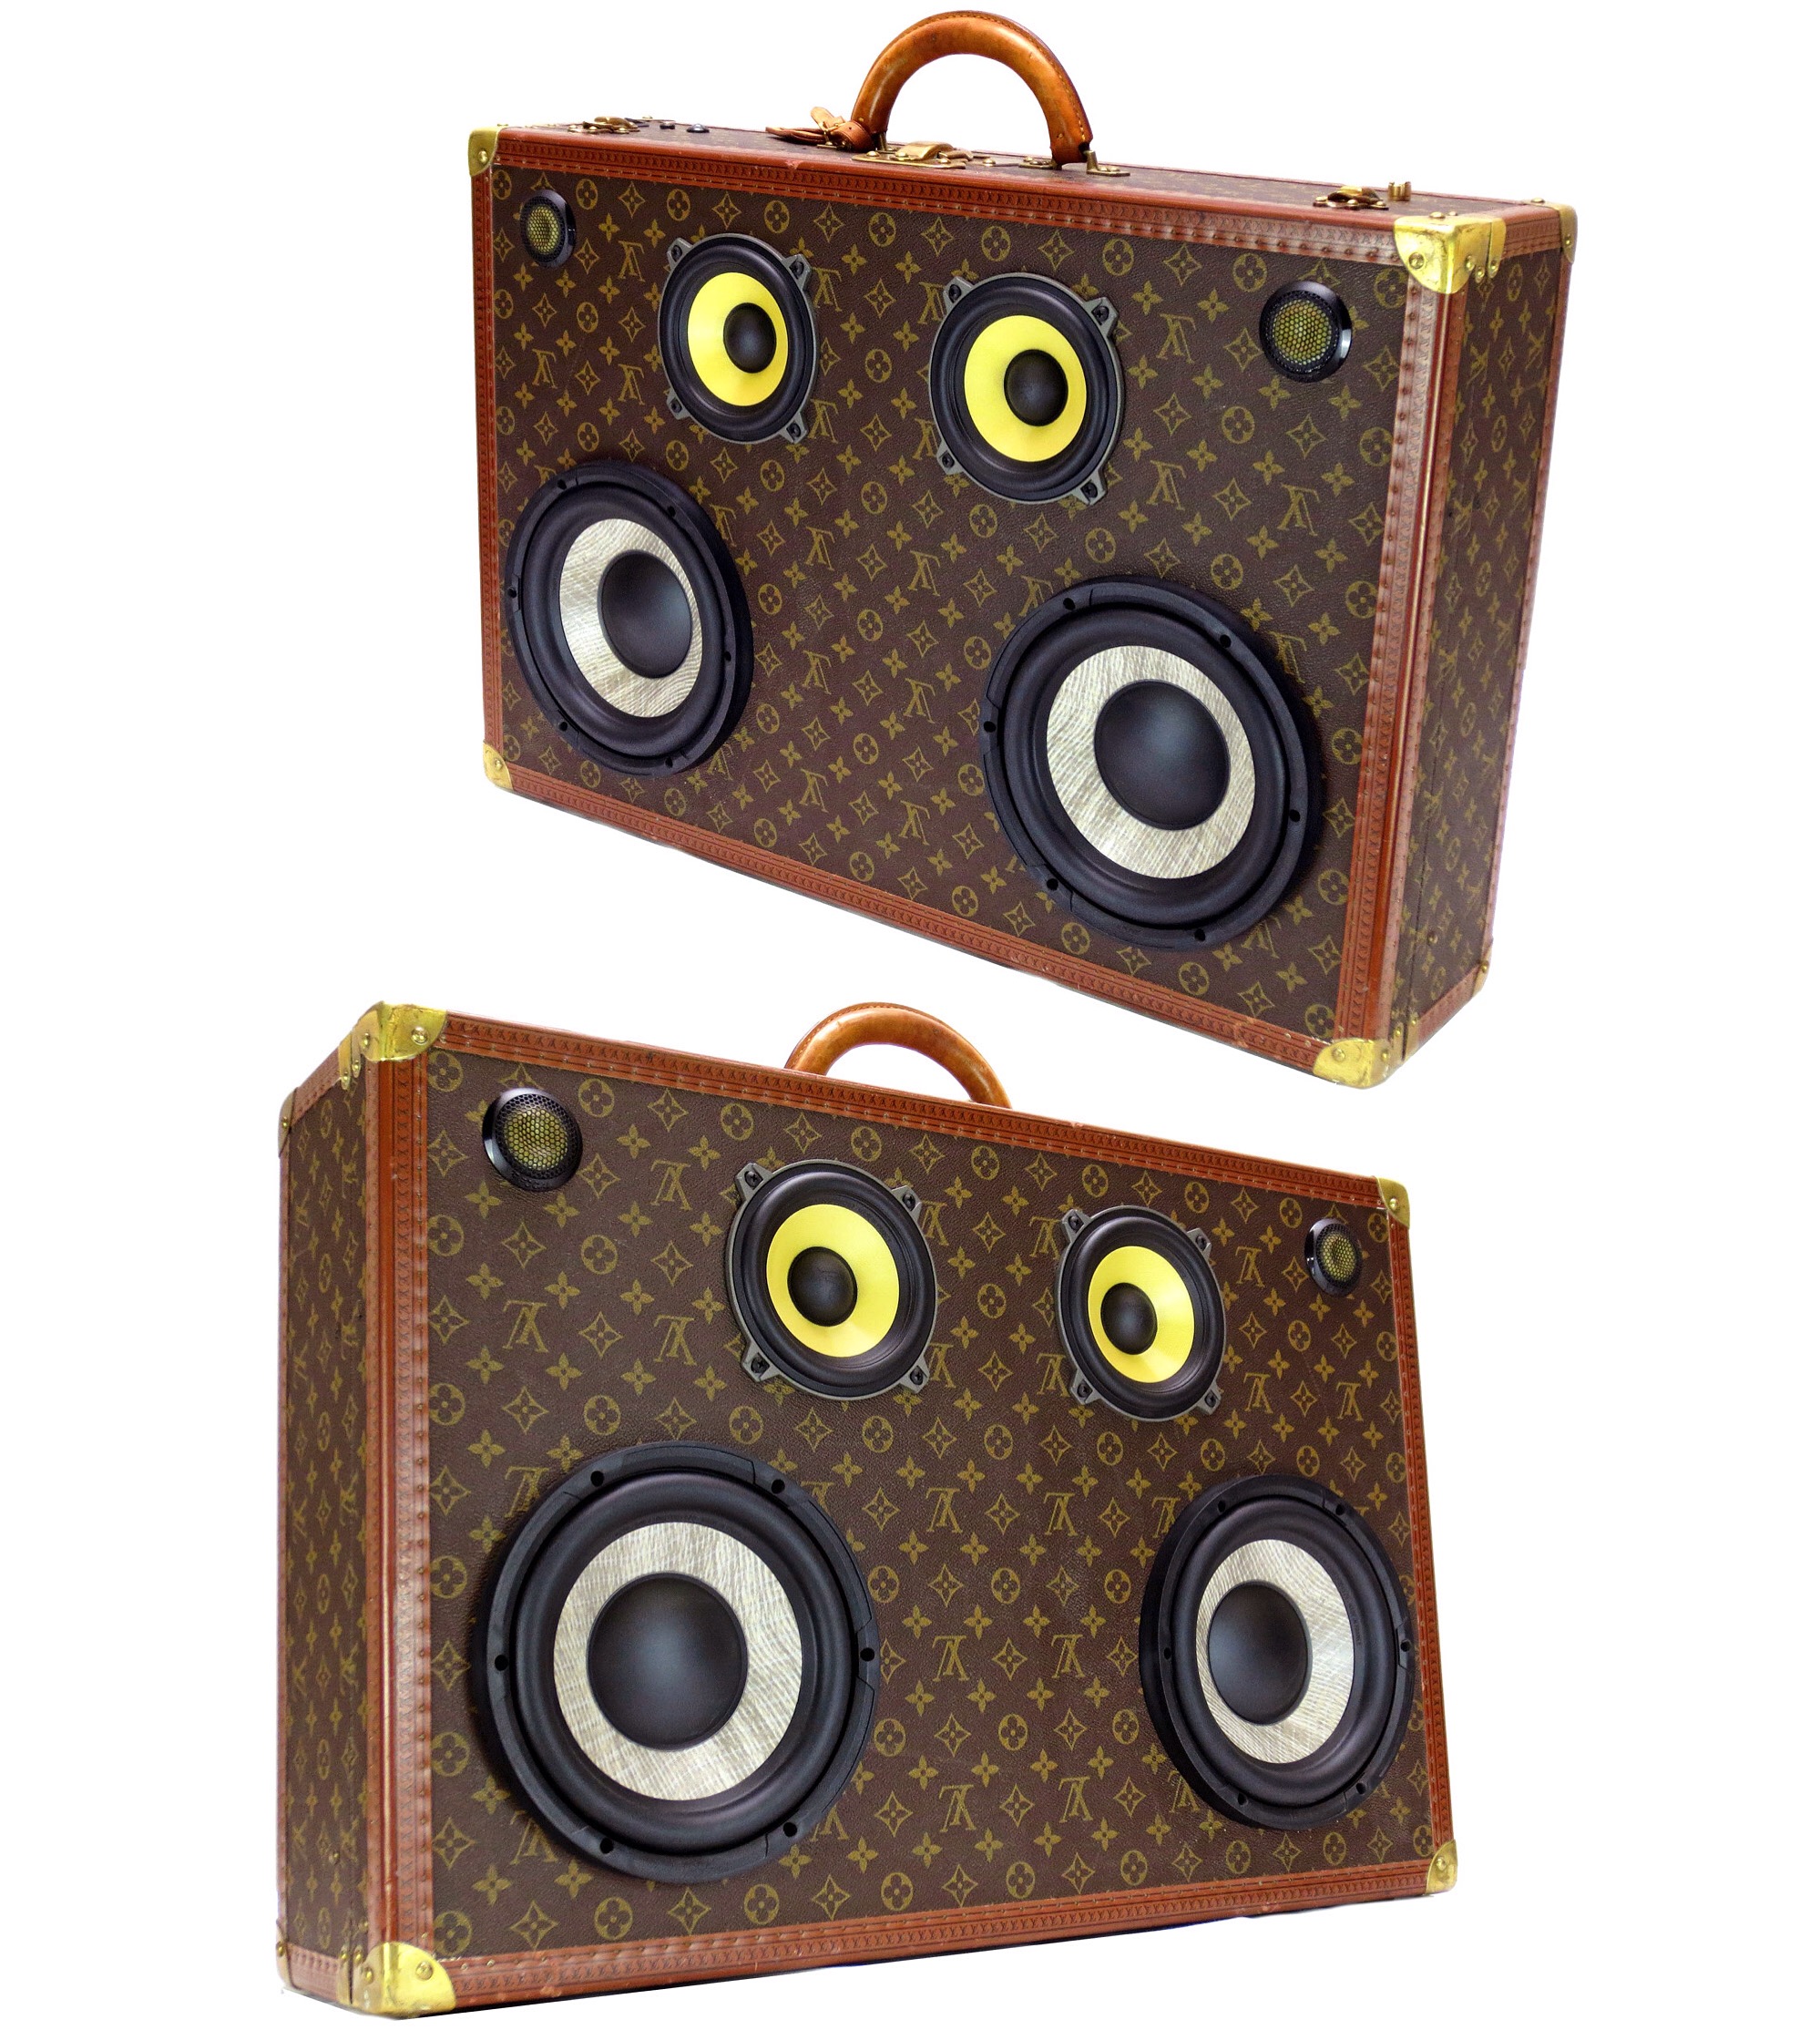 Speaker Trunk PM S00  HighTech Objects and Accessories GI0528  LOUIS  VUITTON